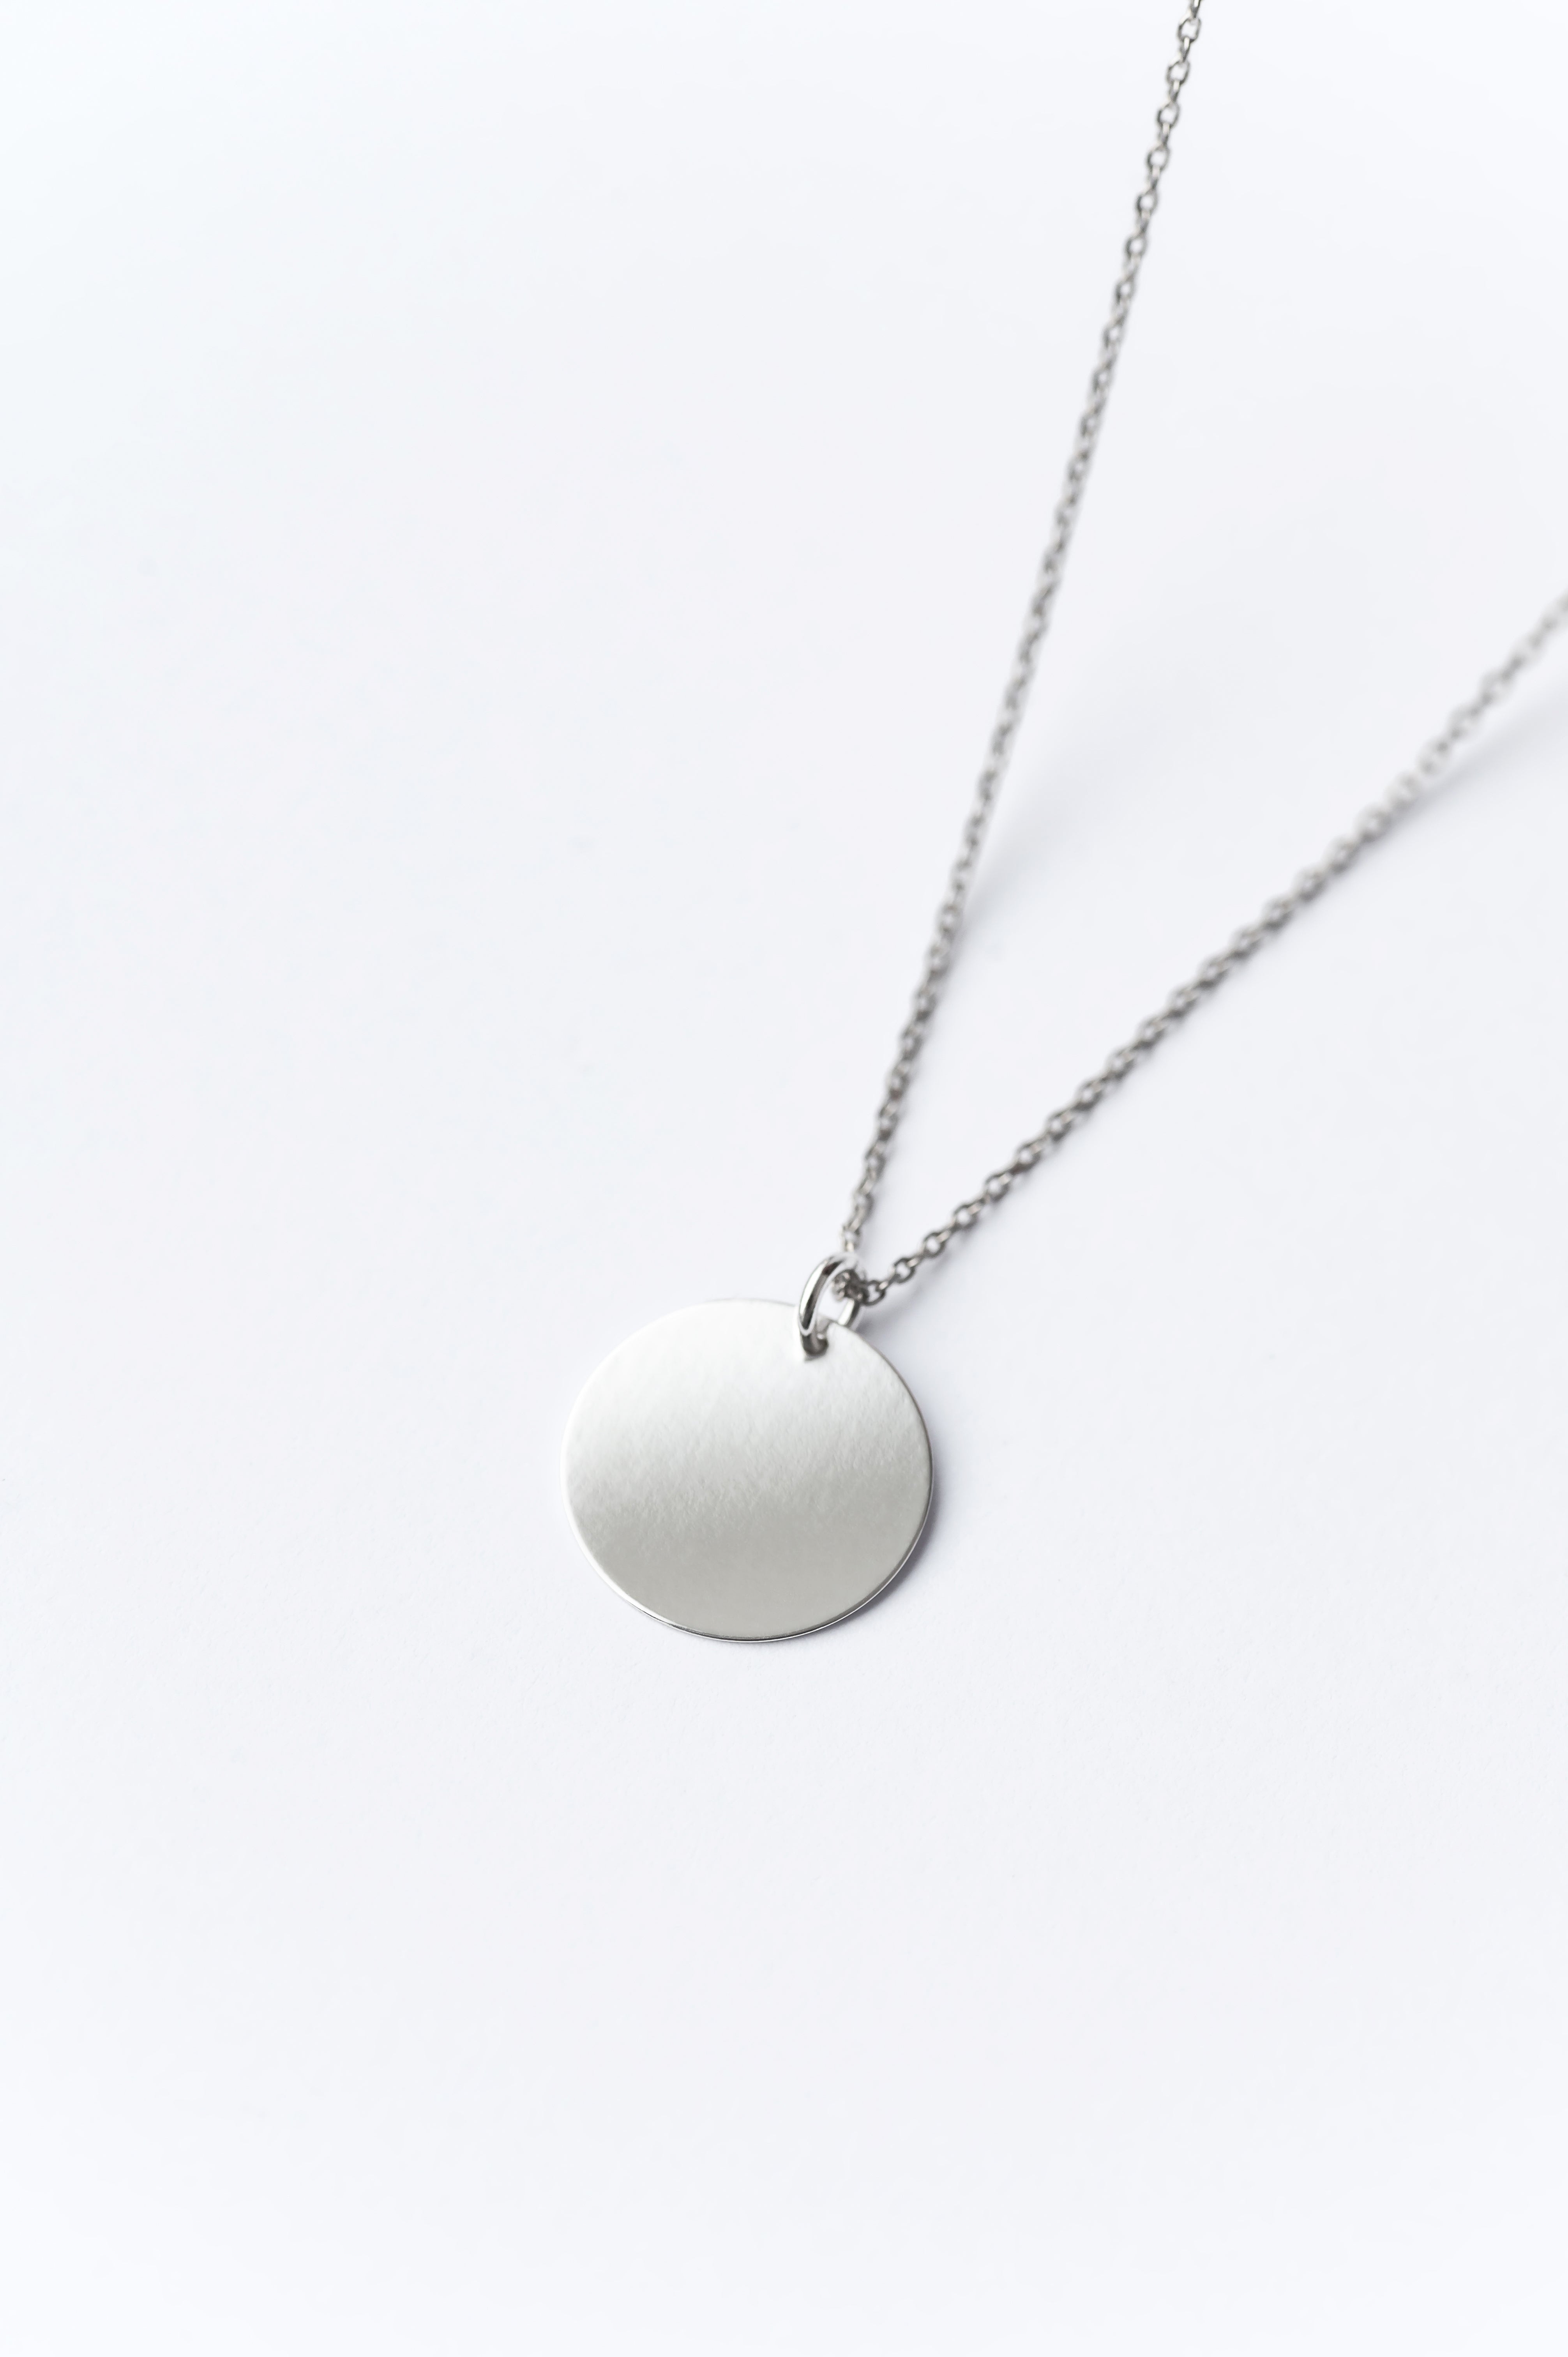 Necklace COIN (17mm) 925 silver